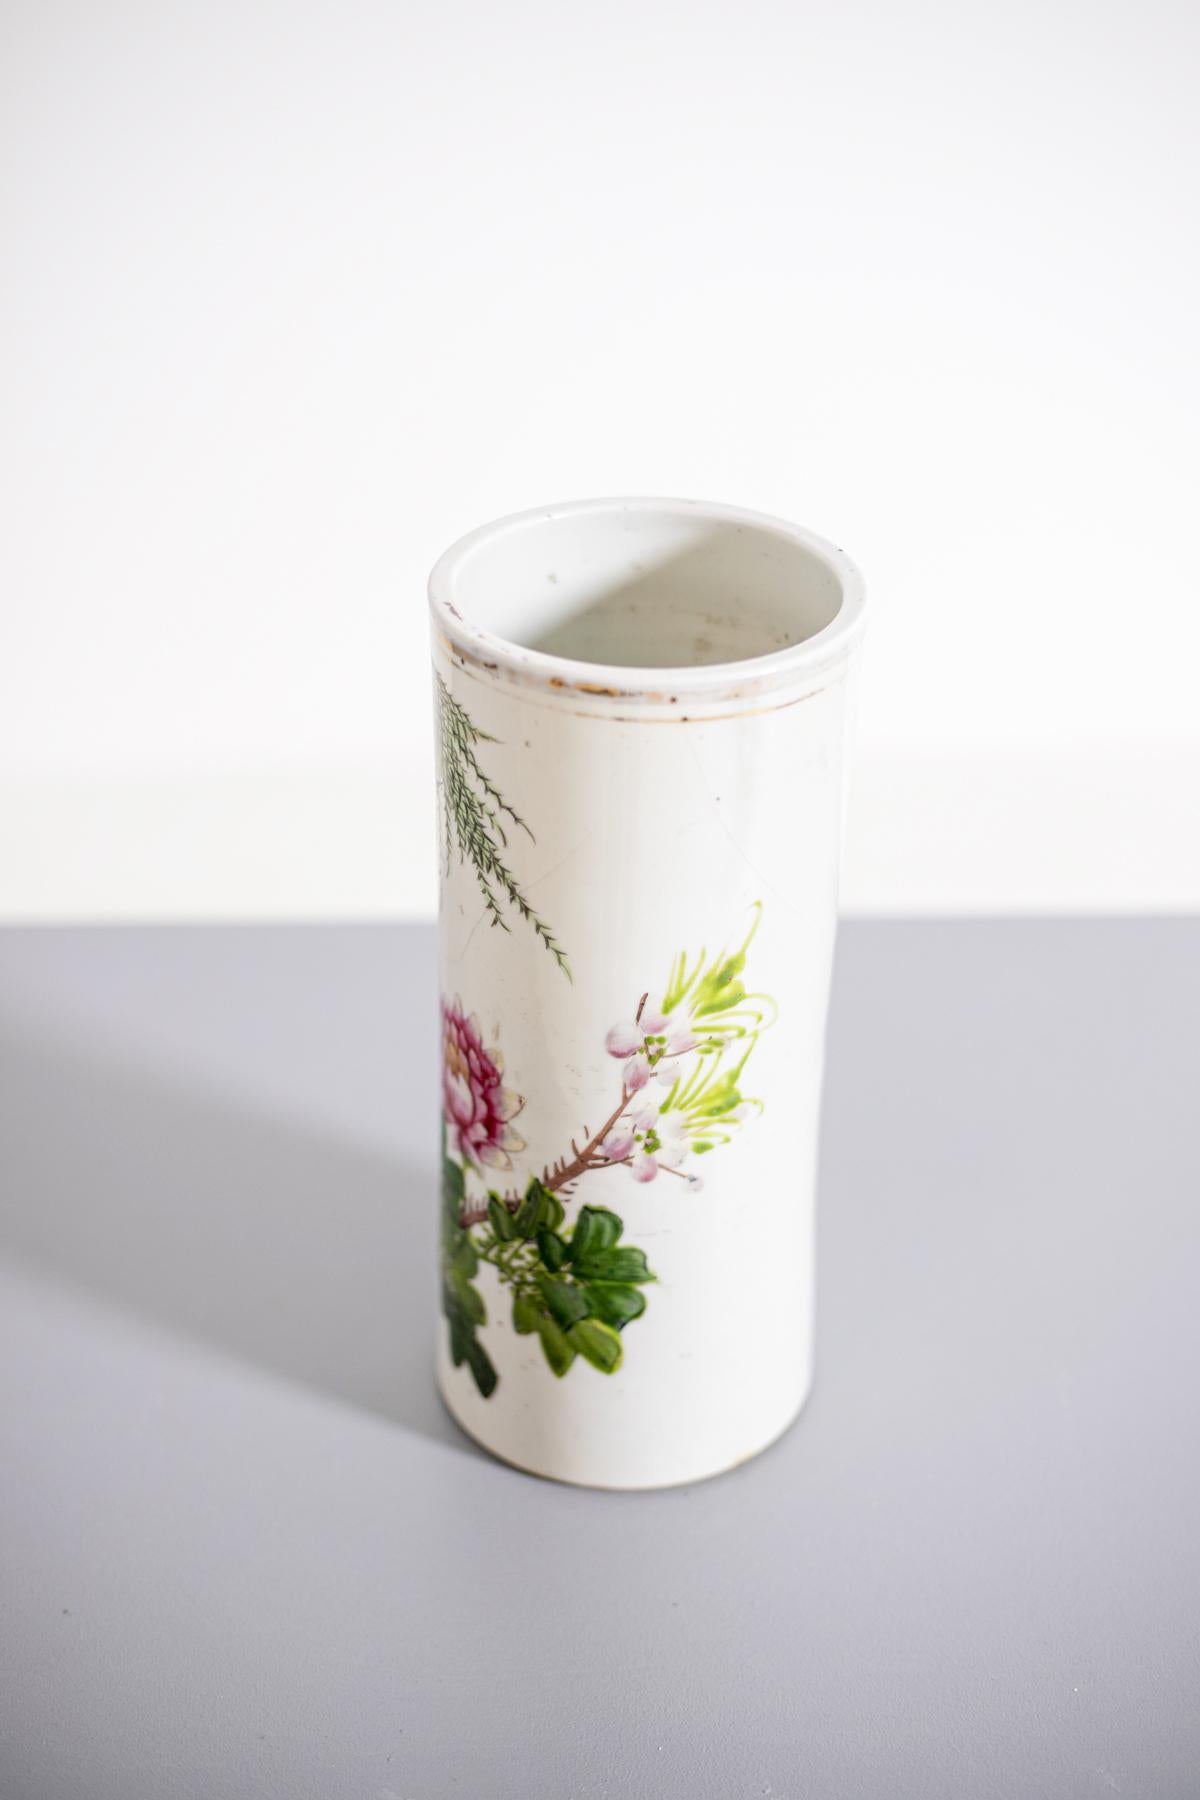 Porcelain vase, polychrome Chinese decoration with characters and ideograms. This vase was created at the end of the 19th century, made entirely of durable white porcelain, with decoration.
The vase depicts a natural scene: one can see a deep